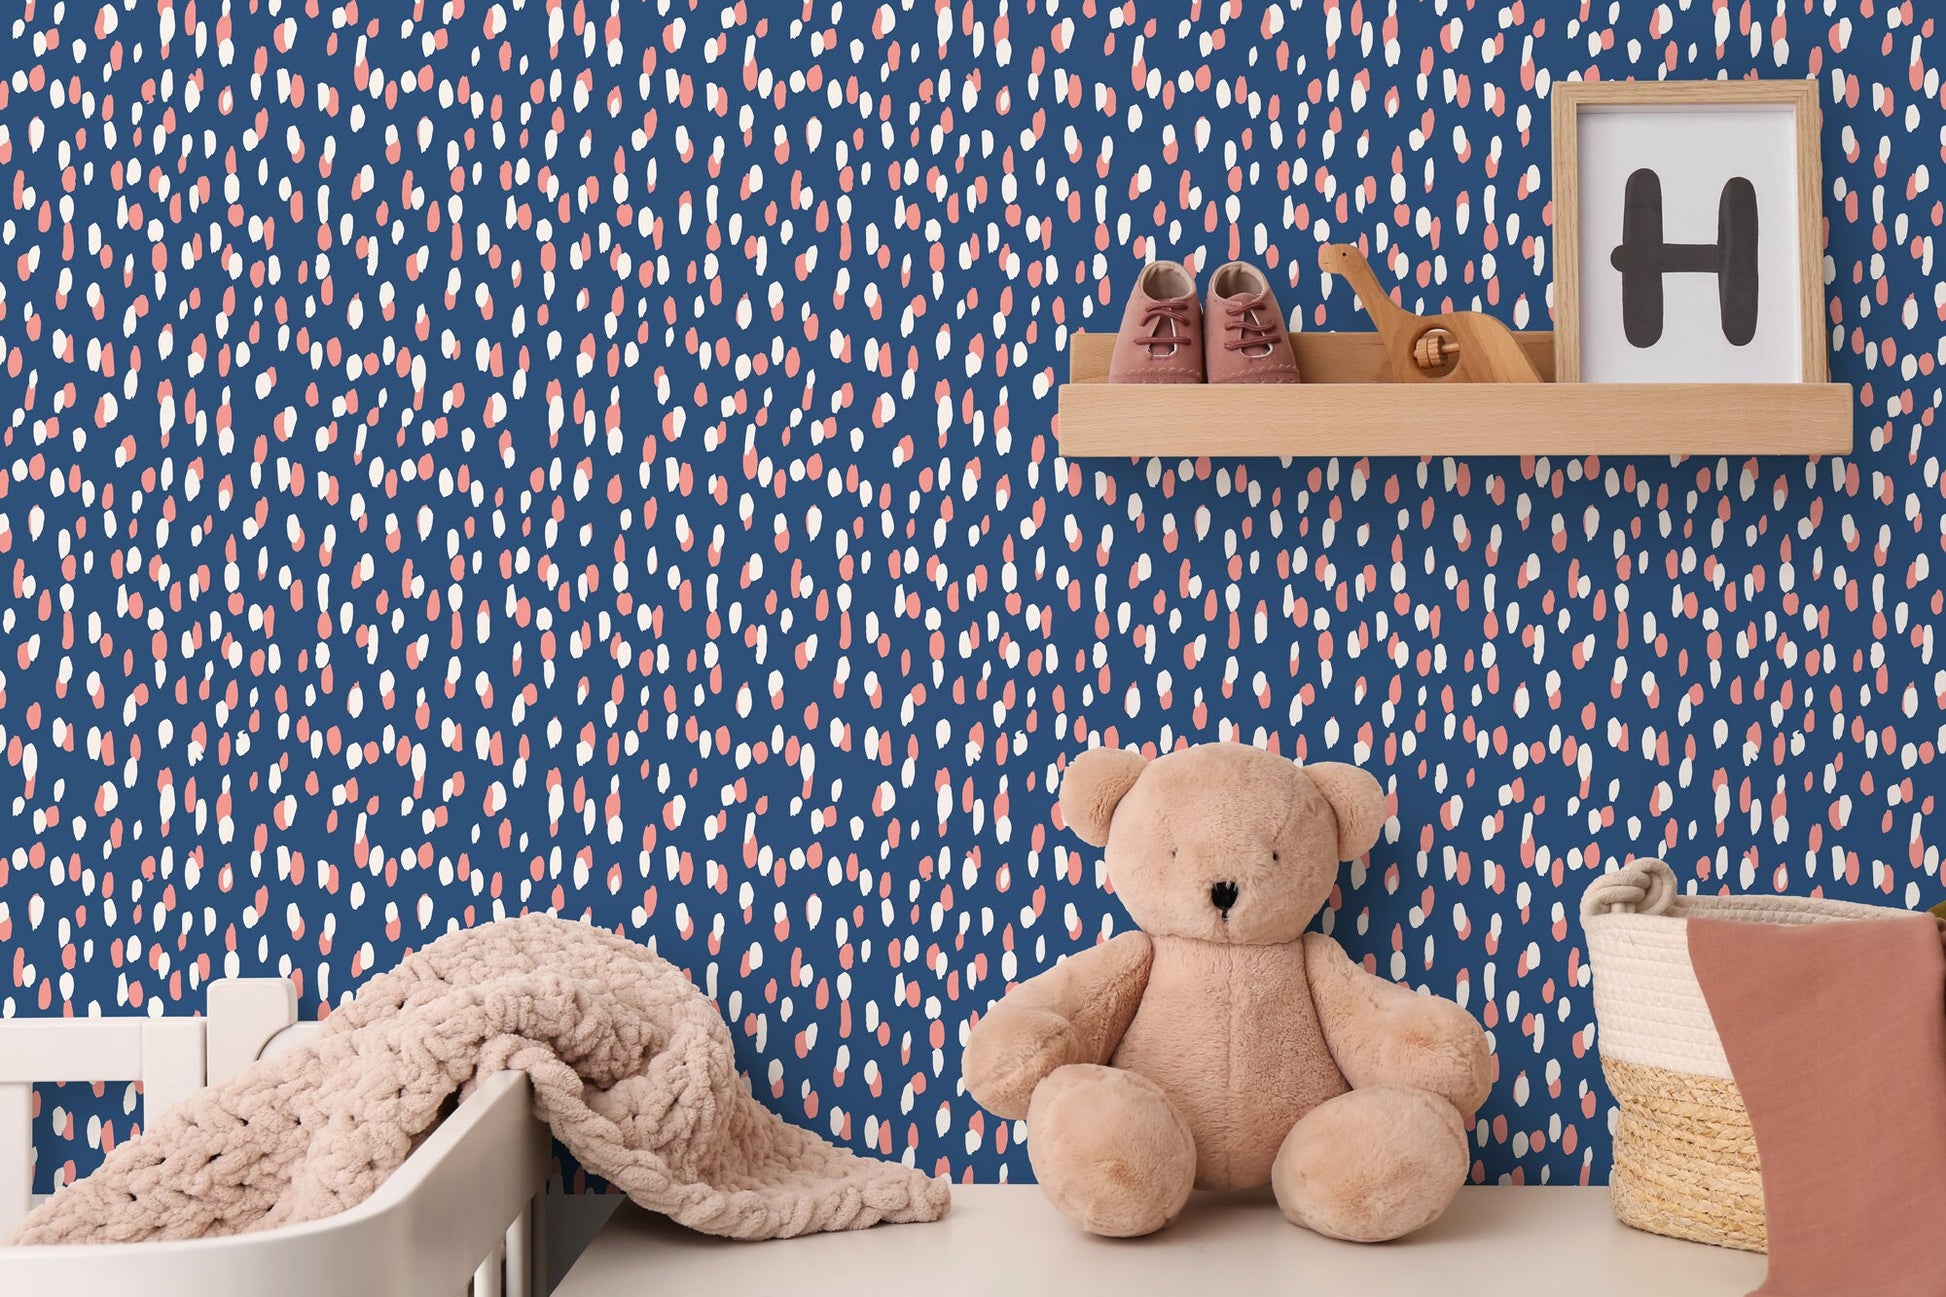 Removable Wallpaper Peel and Stick Wallpaper Wall Paper - Colorful Spots Wallpaper - B253